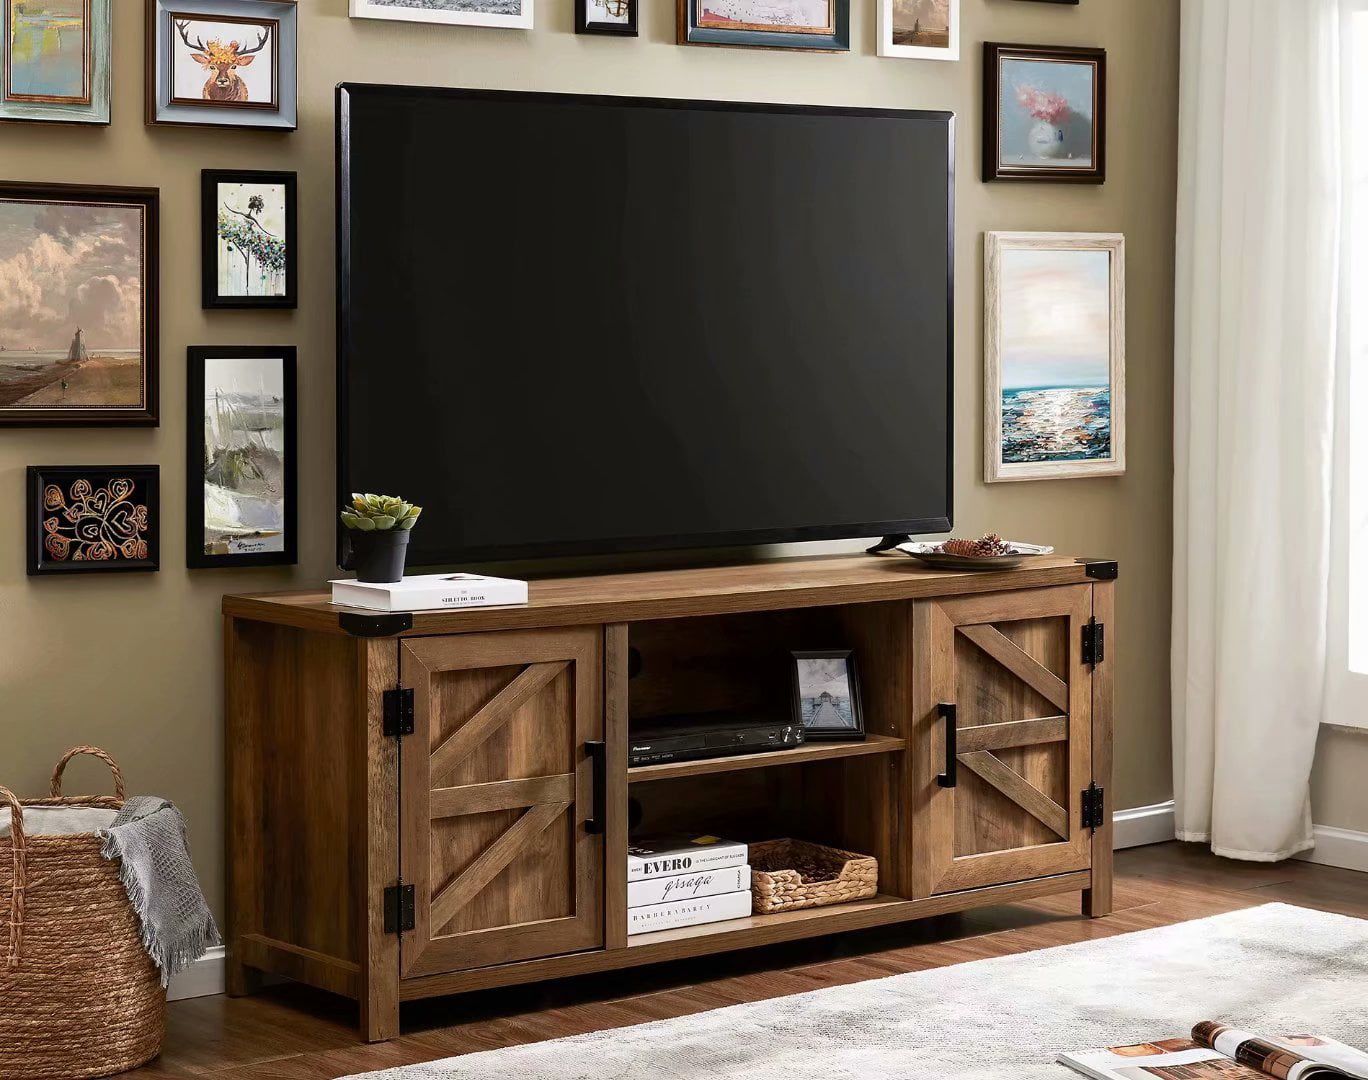 Wampat Farmhouse Tv Stand For Tv Up To 65 Inch Barn Door Media Console Intended For Entertainment Center With Storage Cabinet (Gallery 14 of 20)